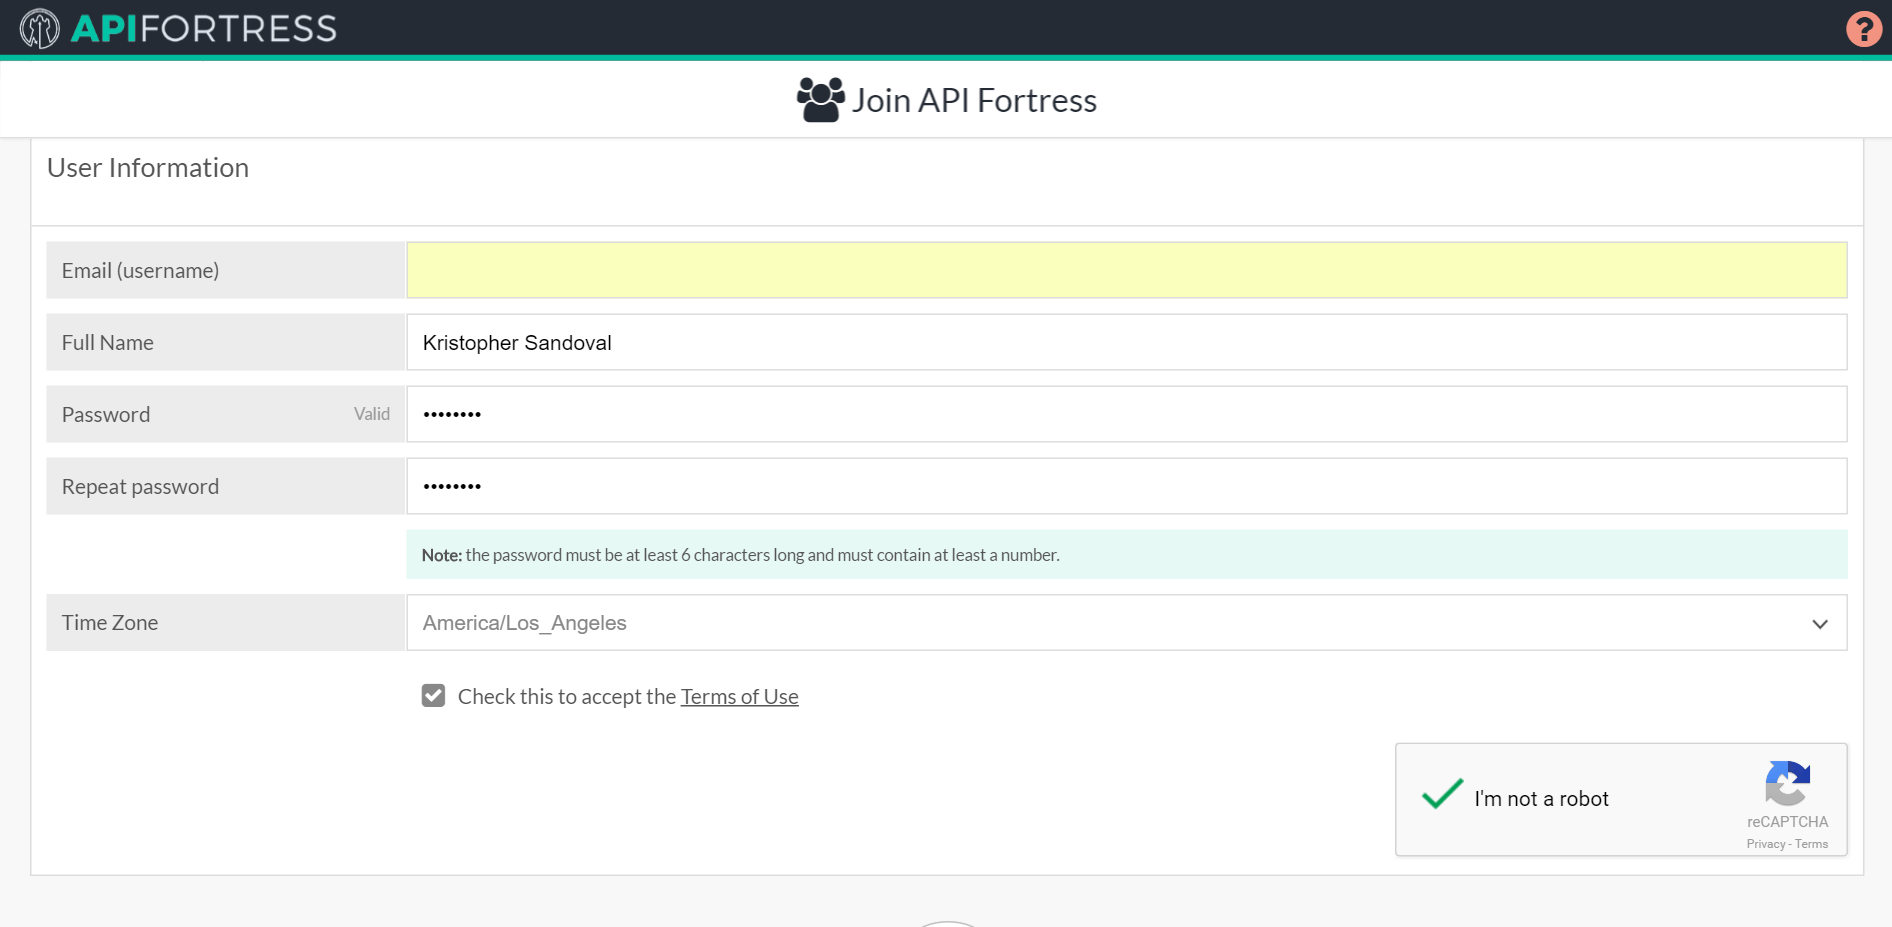 Creating an account with API Fortress